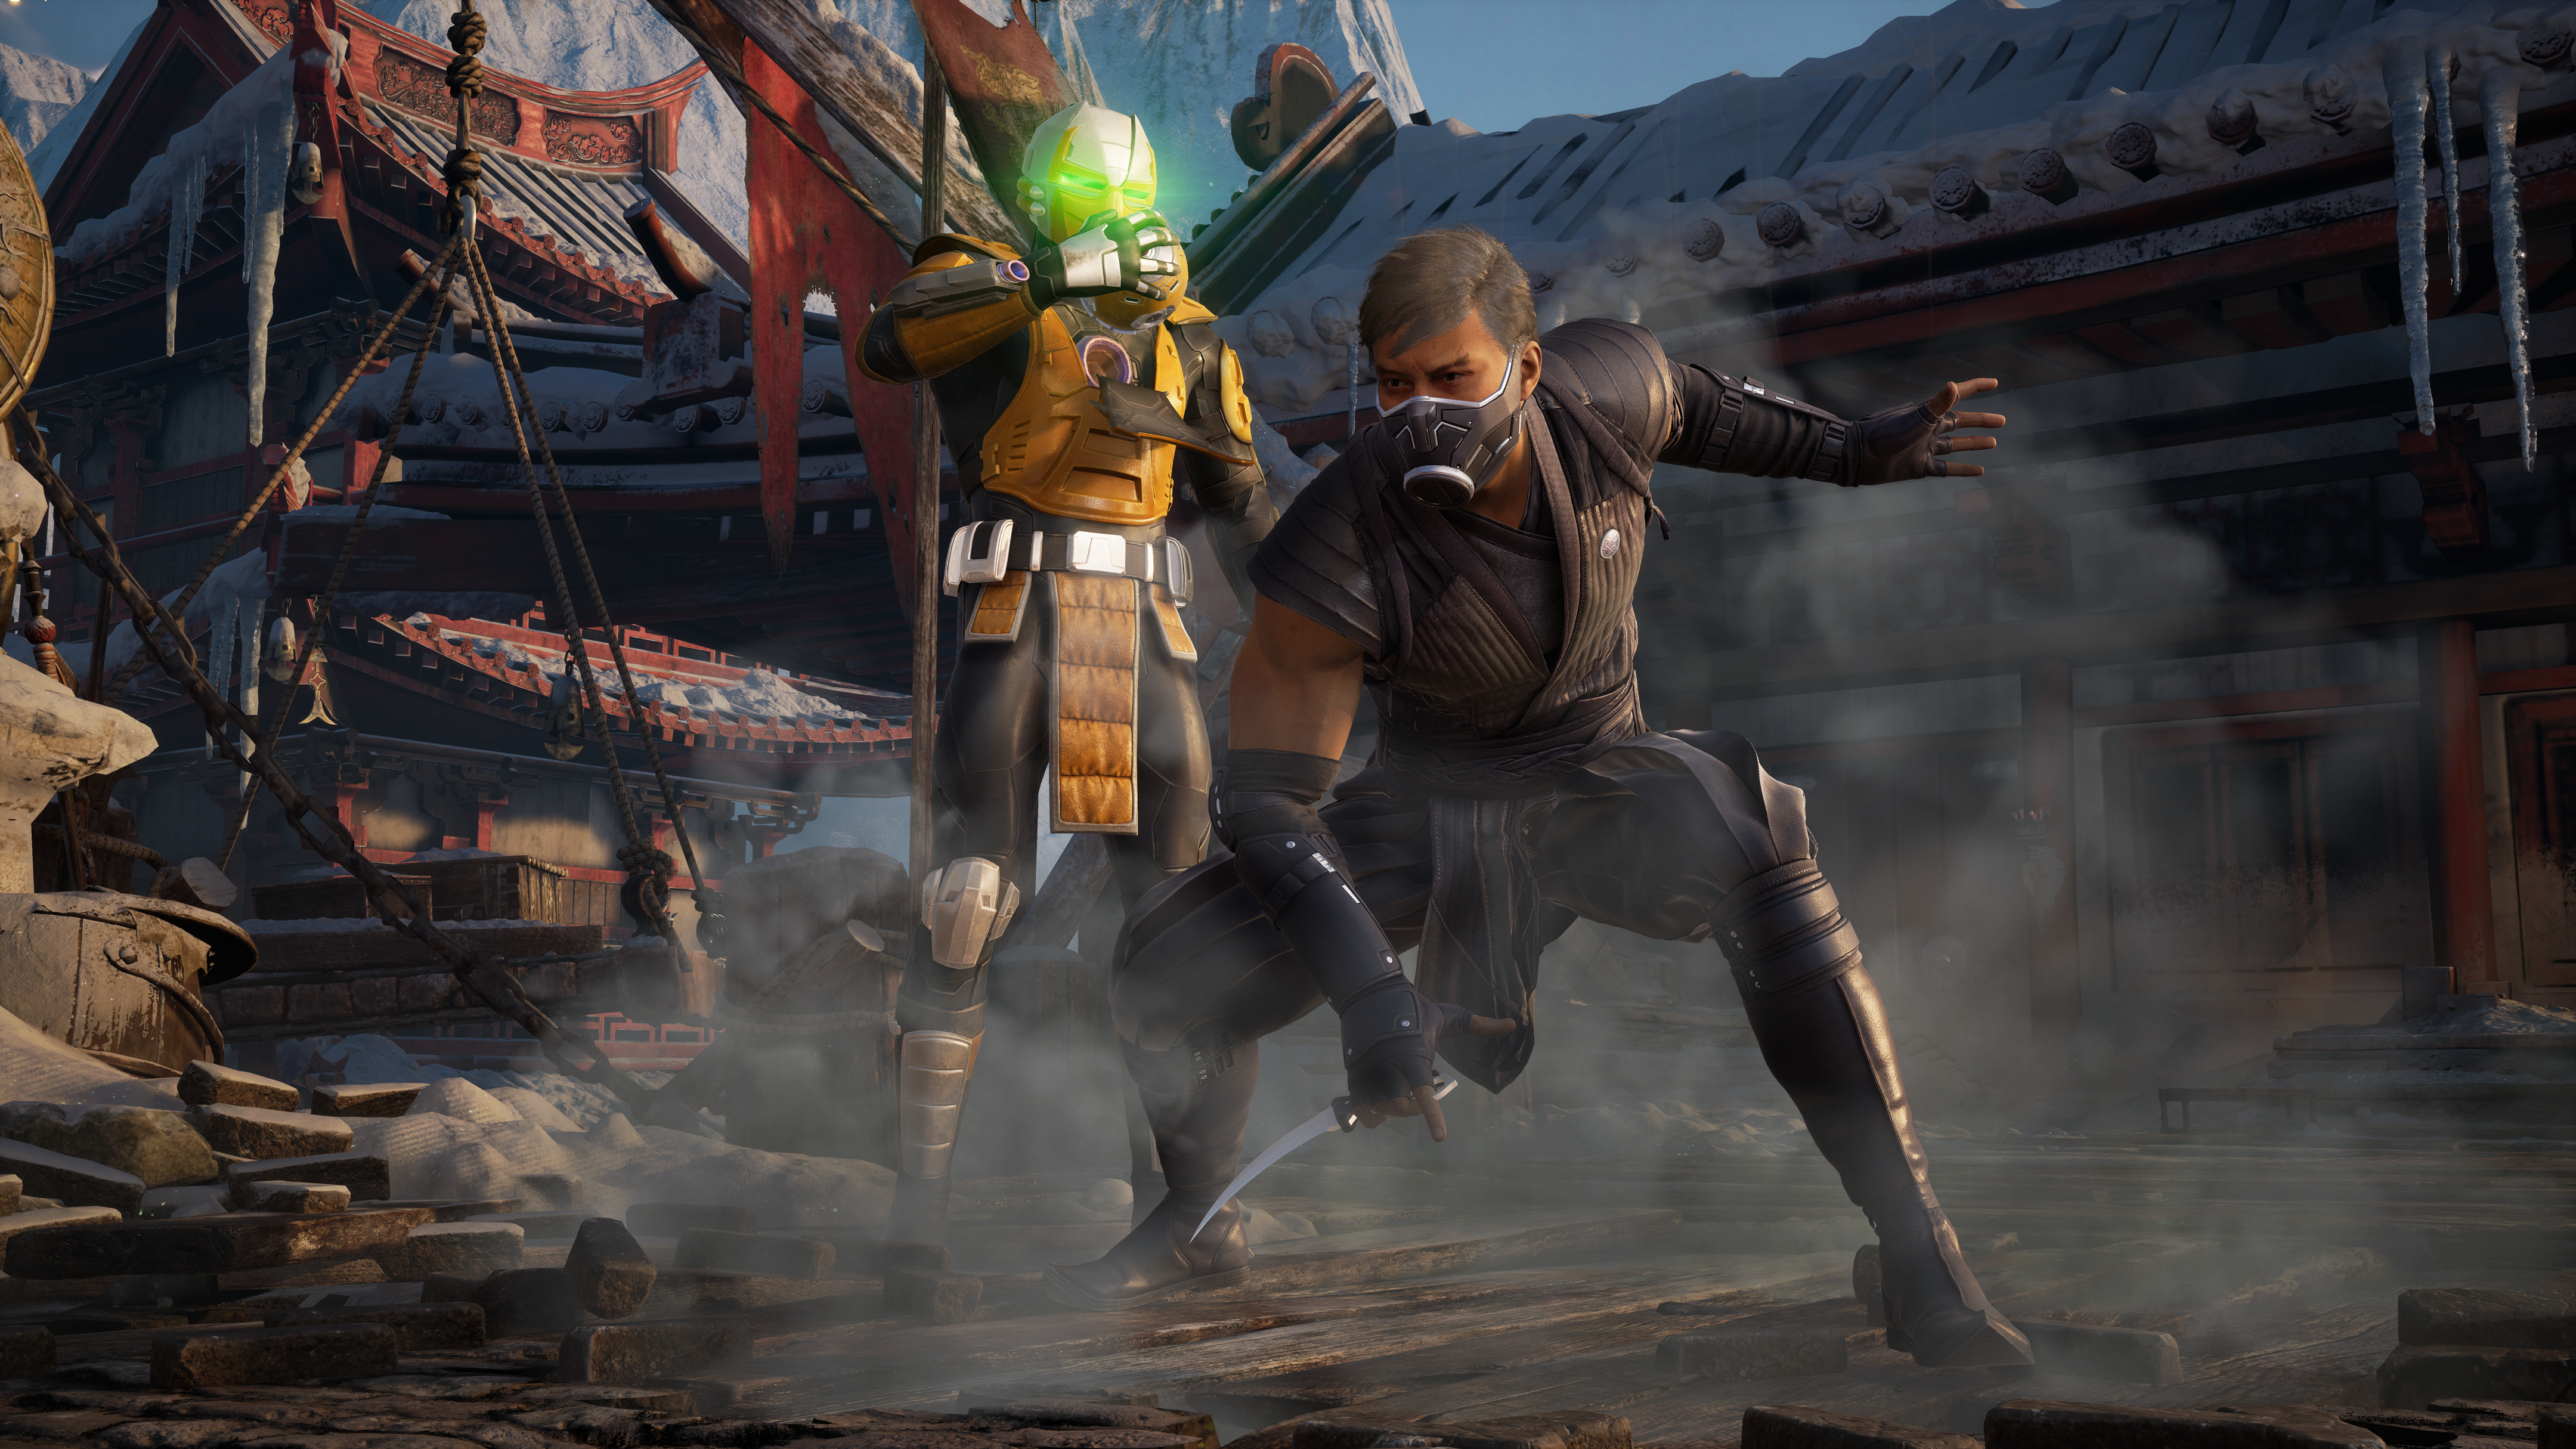 HHW Gaming: All of The Ninjas Show Out In New ‘Mortal Kombat 1’ “Lin Kuei” Trailer